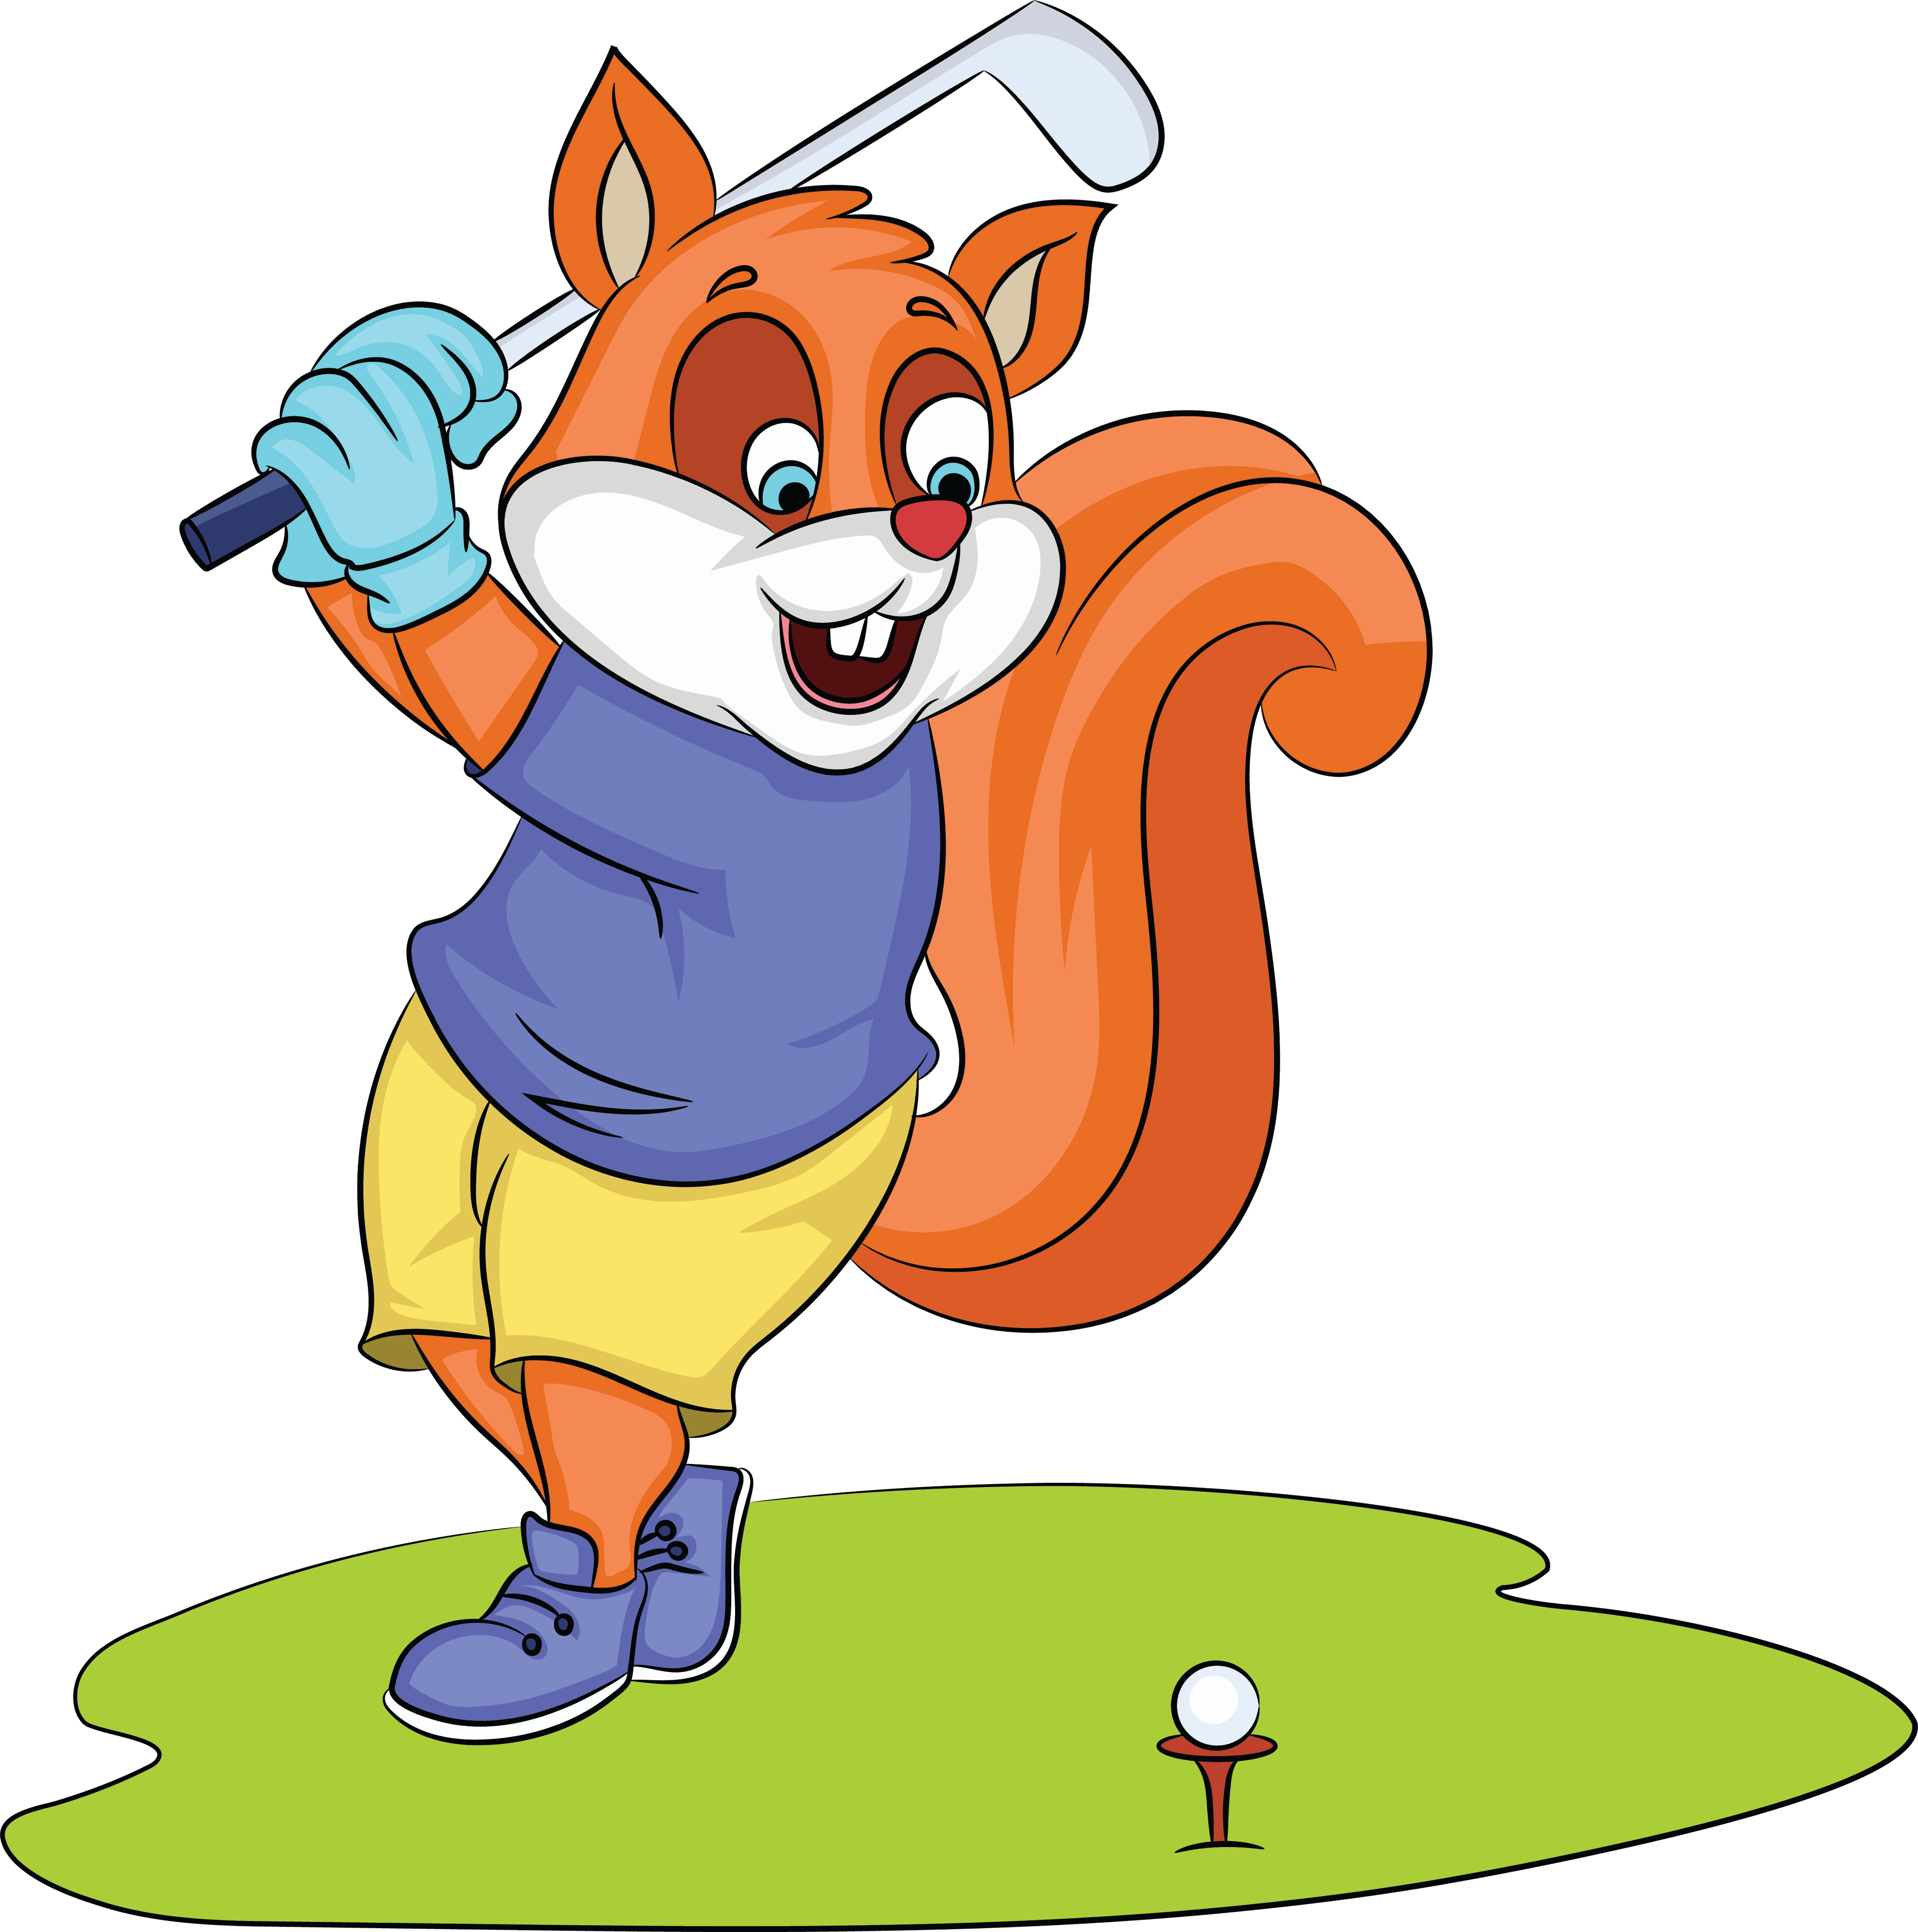 Cute Squirrel Playing Golf Card 2 of Cute Animals Playing Golf Series 2021